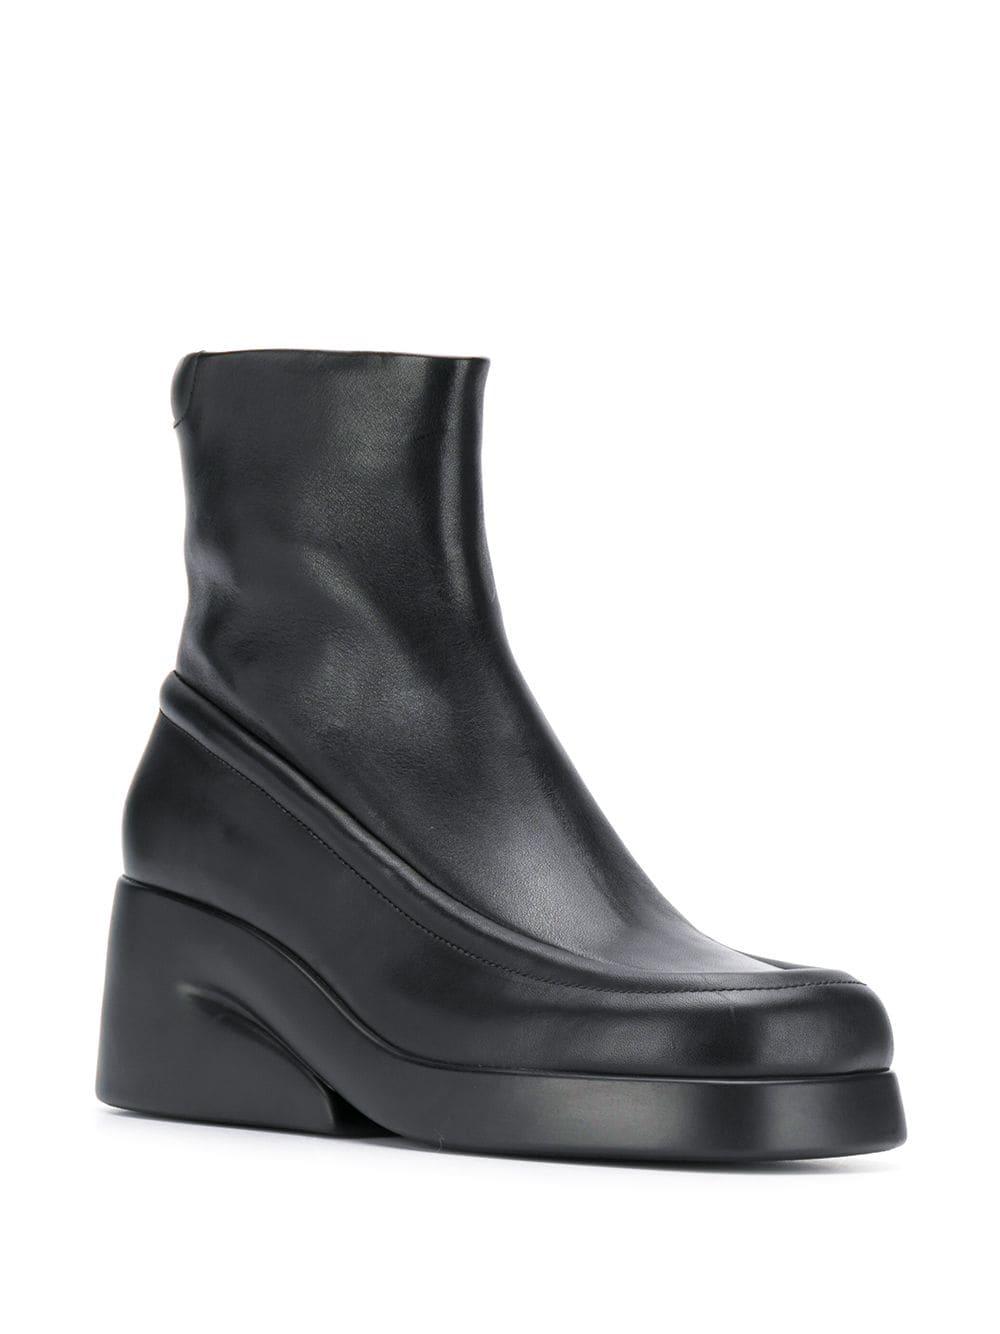 Camper Leather Kaah Boots in Black - Lyst